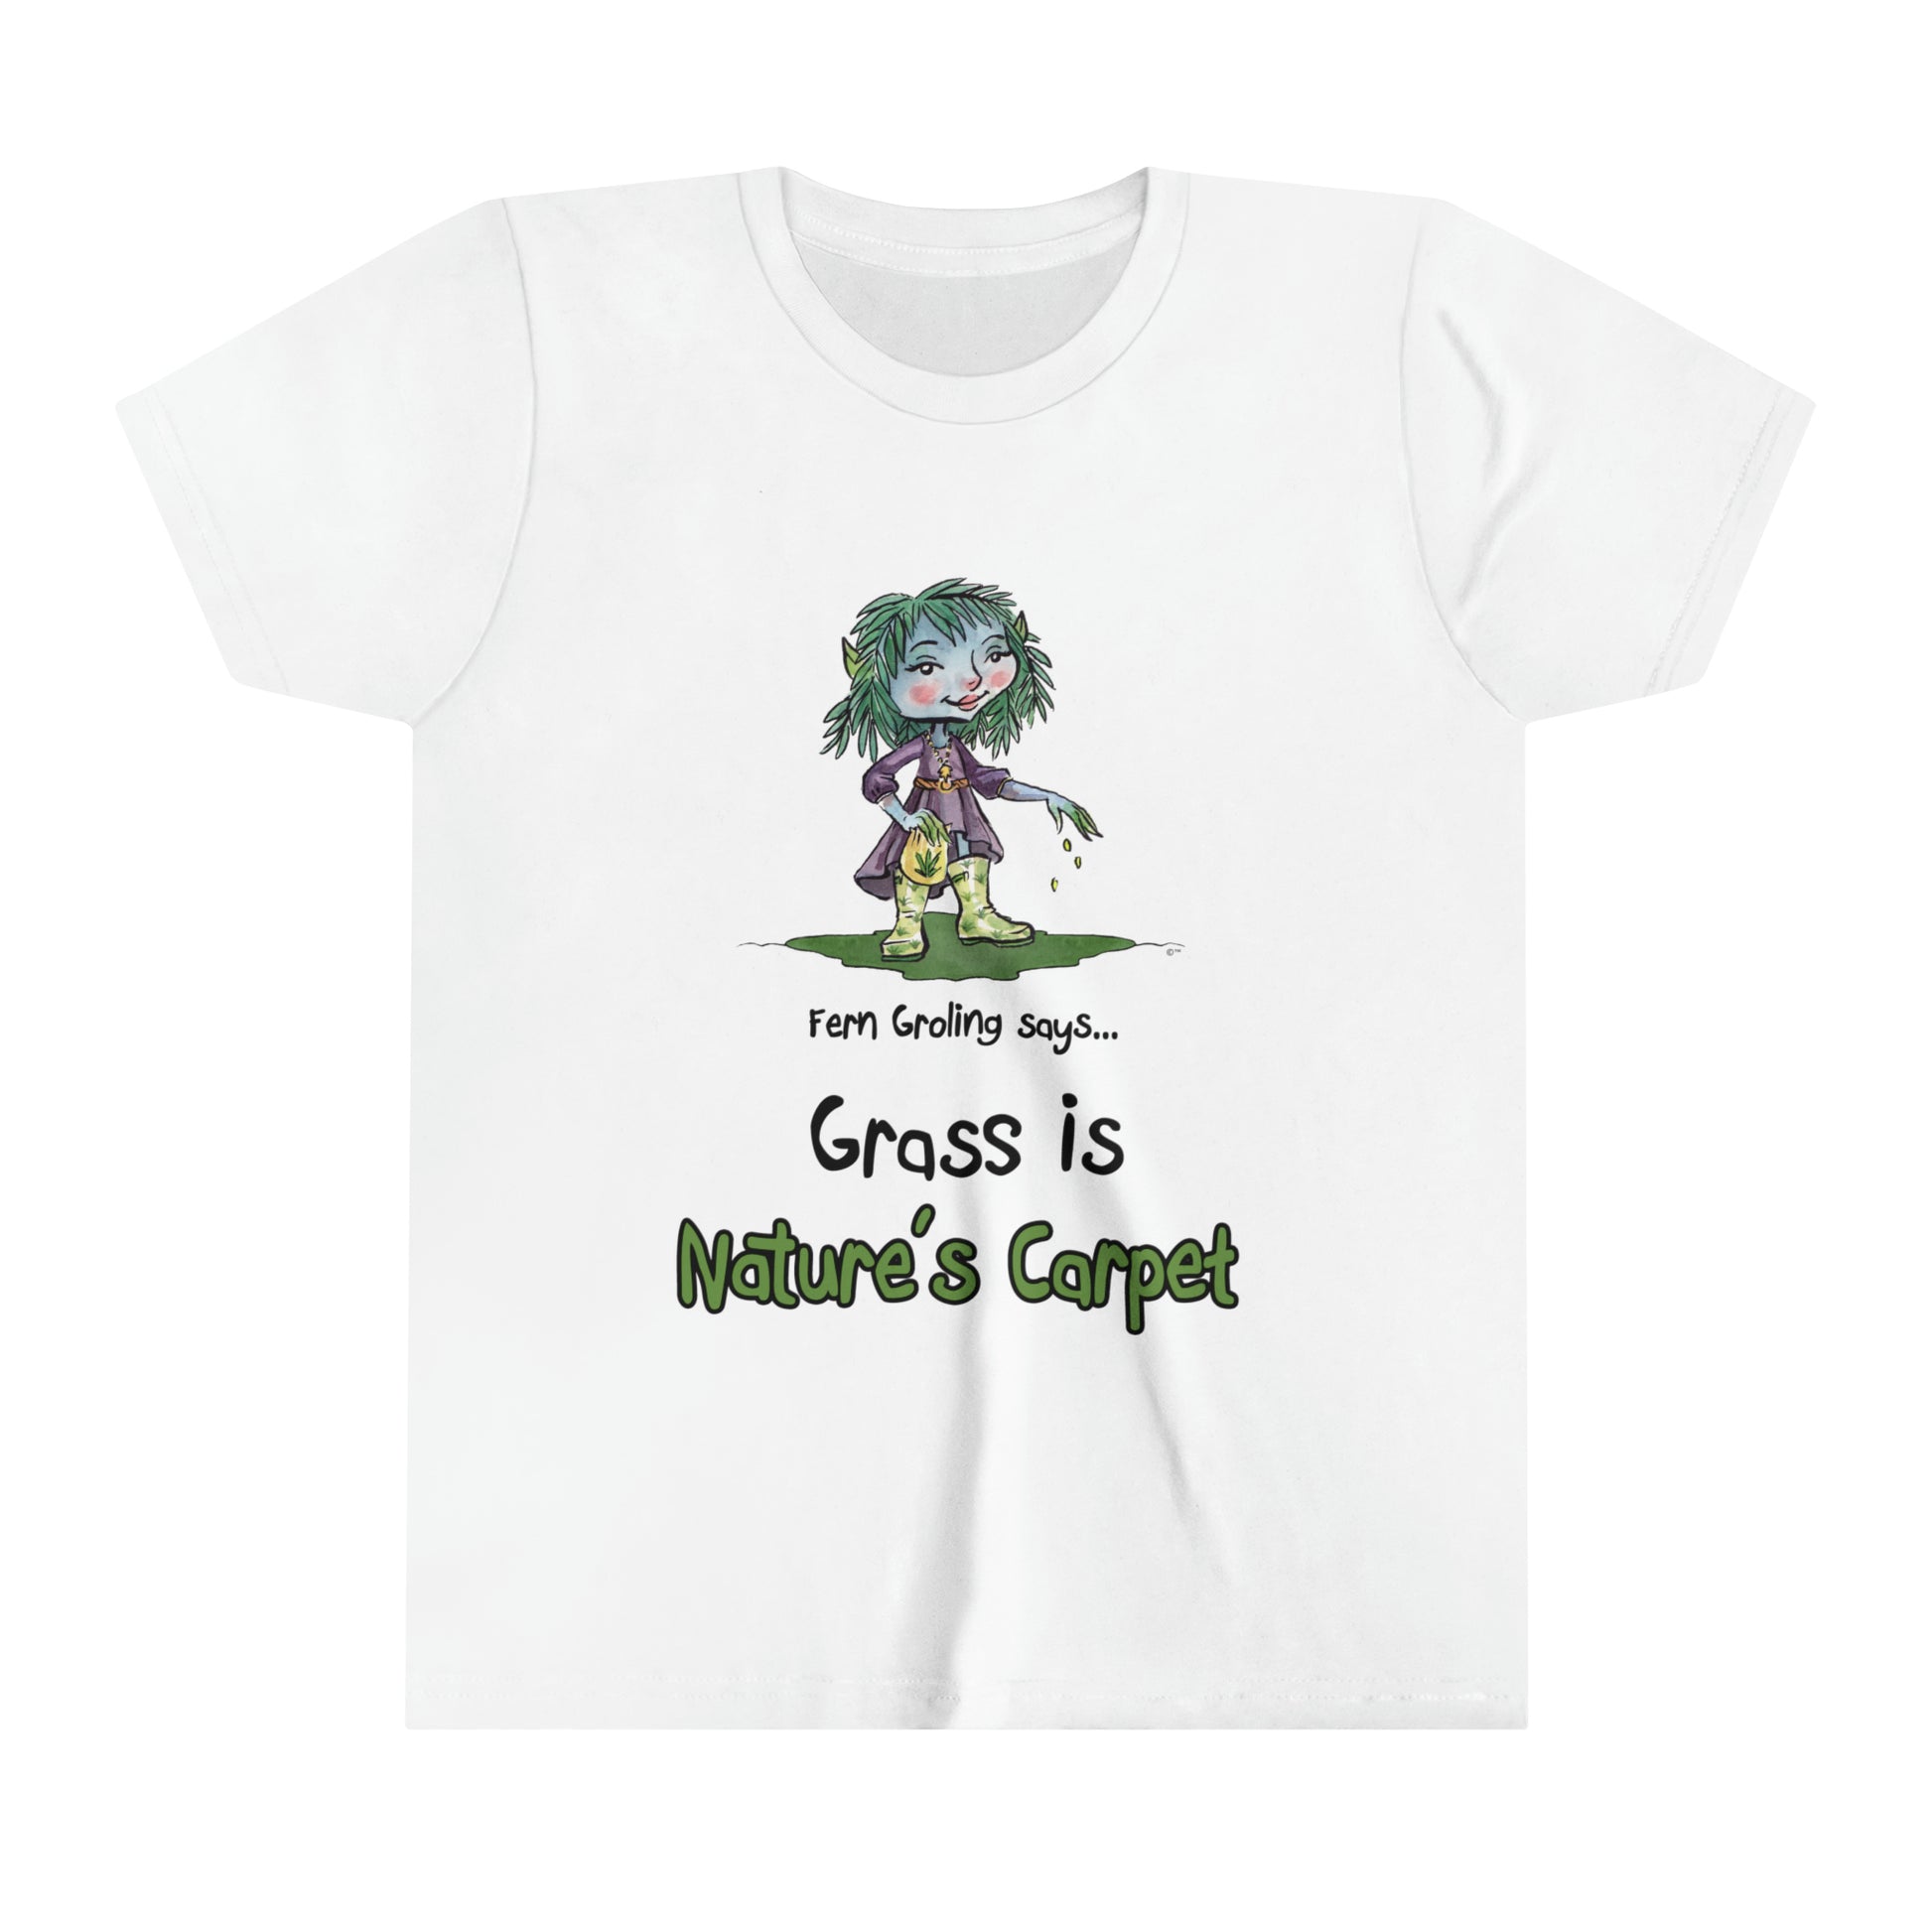 A white official Grolings kids' t-shirt, featuring the phrase 'Fern Groling says... Grass is Nature’s Carpet.' The t-shirt showcases Fern Groling, standing on green ground and planting grass seeds. The scene emphasises the importance of grass as a natural carpet, symbolising the lushness and vitality it brings to the environment. Fern Groling encourages an appreciation for the beauty and ecological significance of grass in nature.